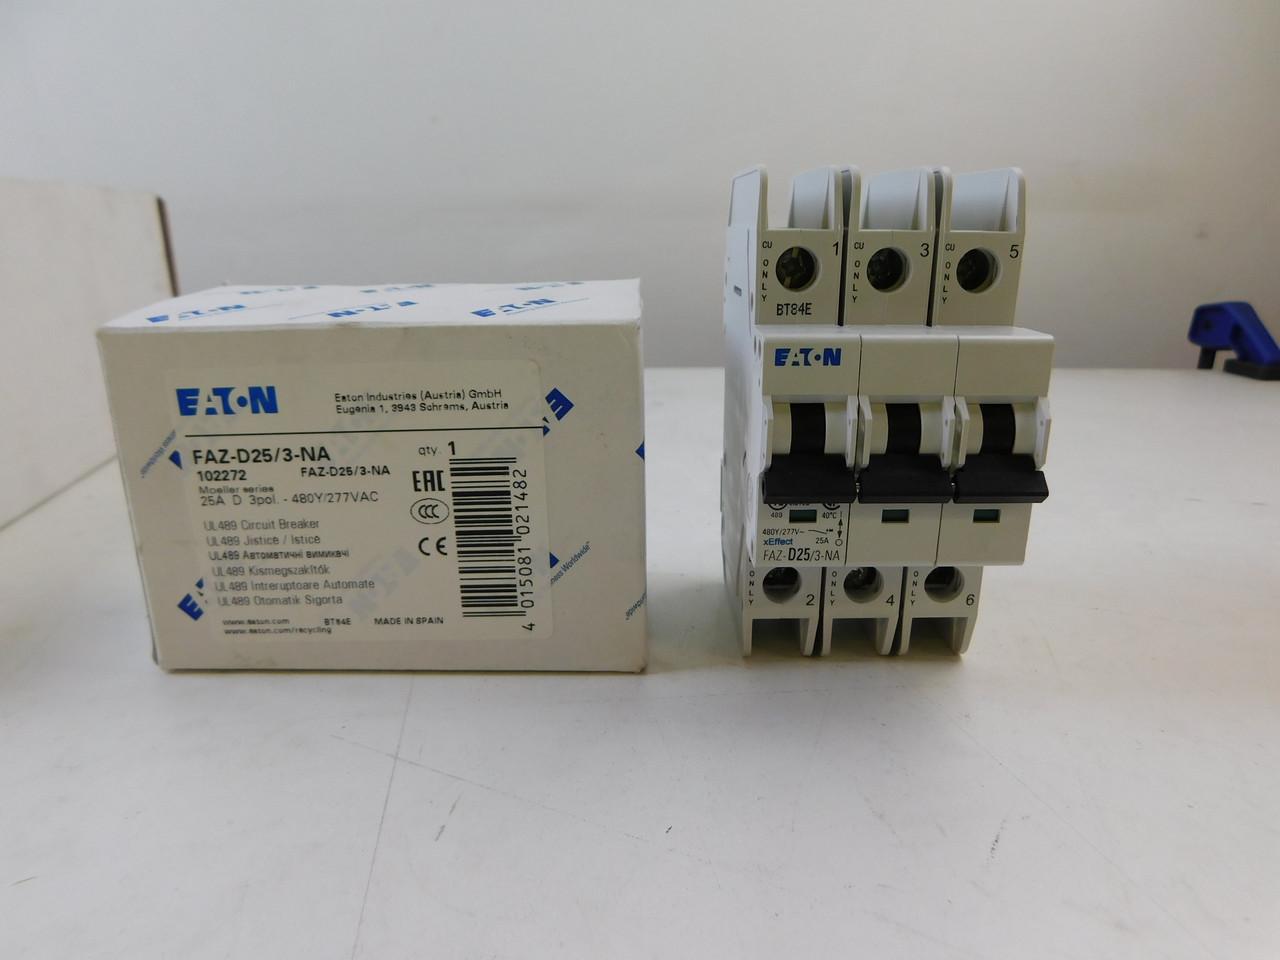 Eaton FAZ-D25/3-NA 277/480 VAC 50/60 Hz, 25 A, 3-Pole, 10/14 kA, 10 to 20 x Rated Current, Screw Terminal, DIN Rail Mount, Standard Packaging, D-Curve, Current Limiting, Thermal Magnetic